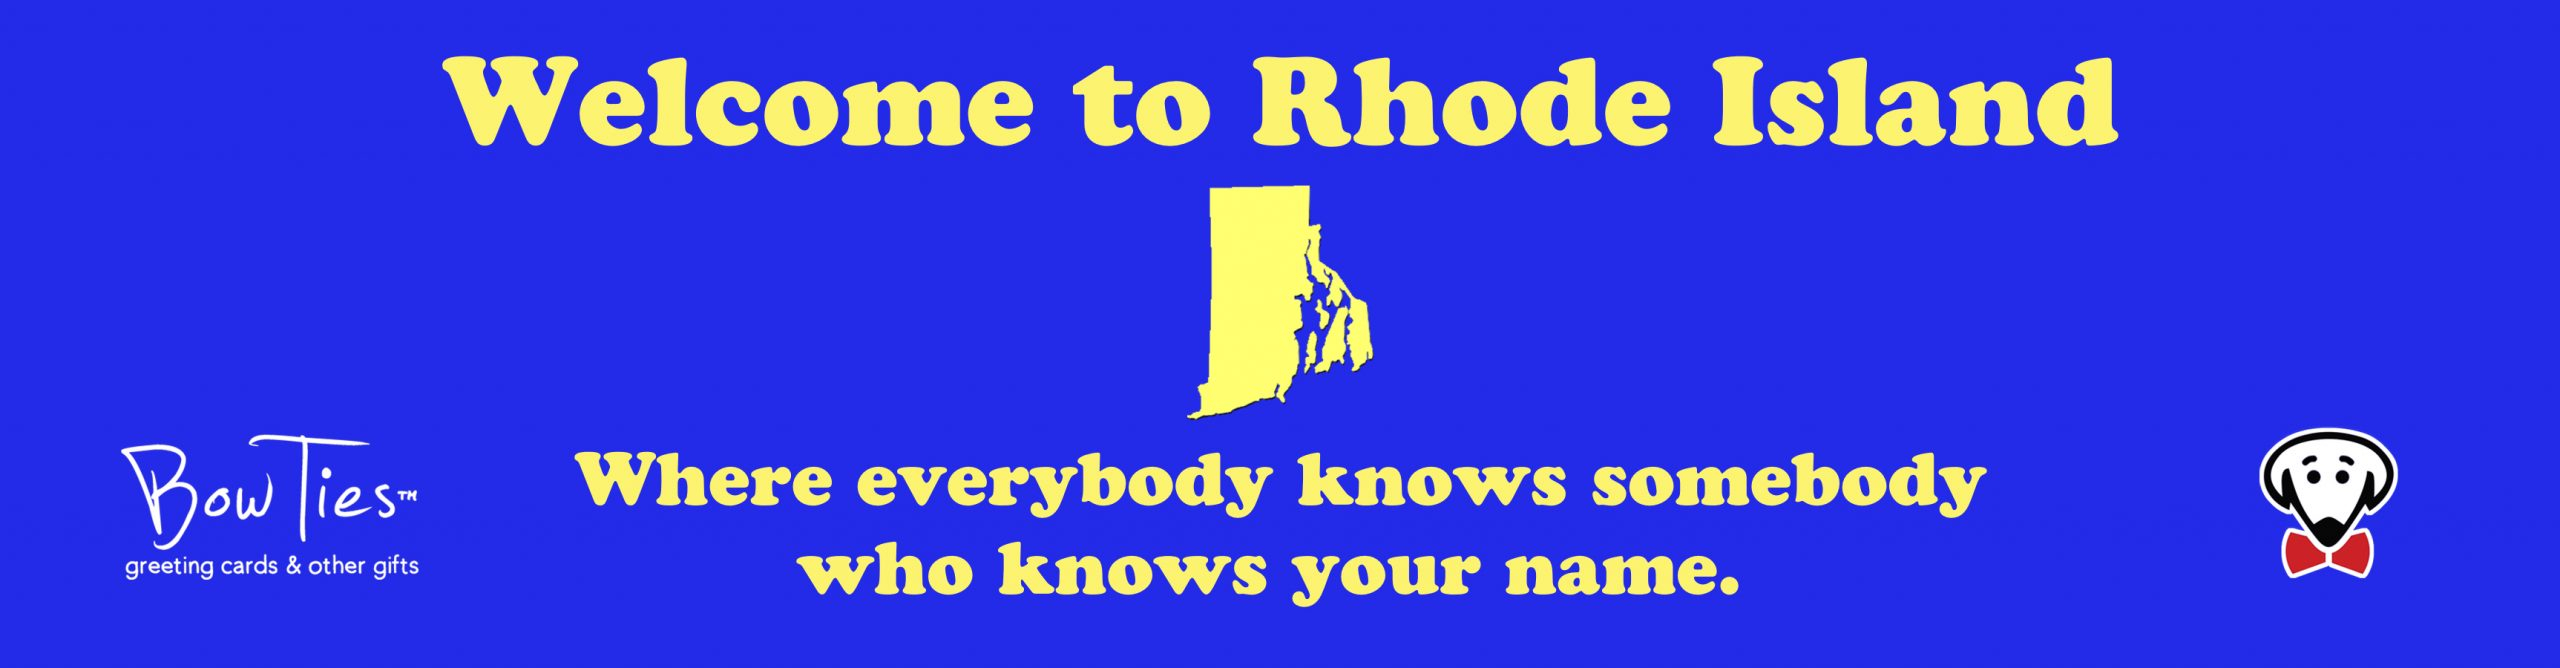 Welcome to Rhode Island…Where everybody knows someone who knows your name. – sticker